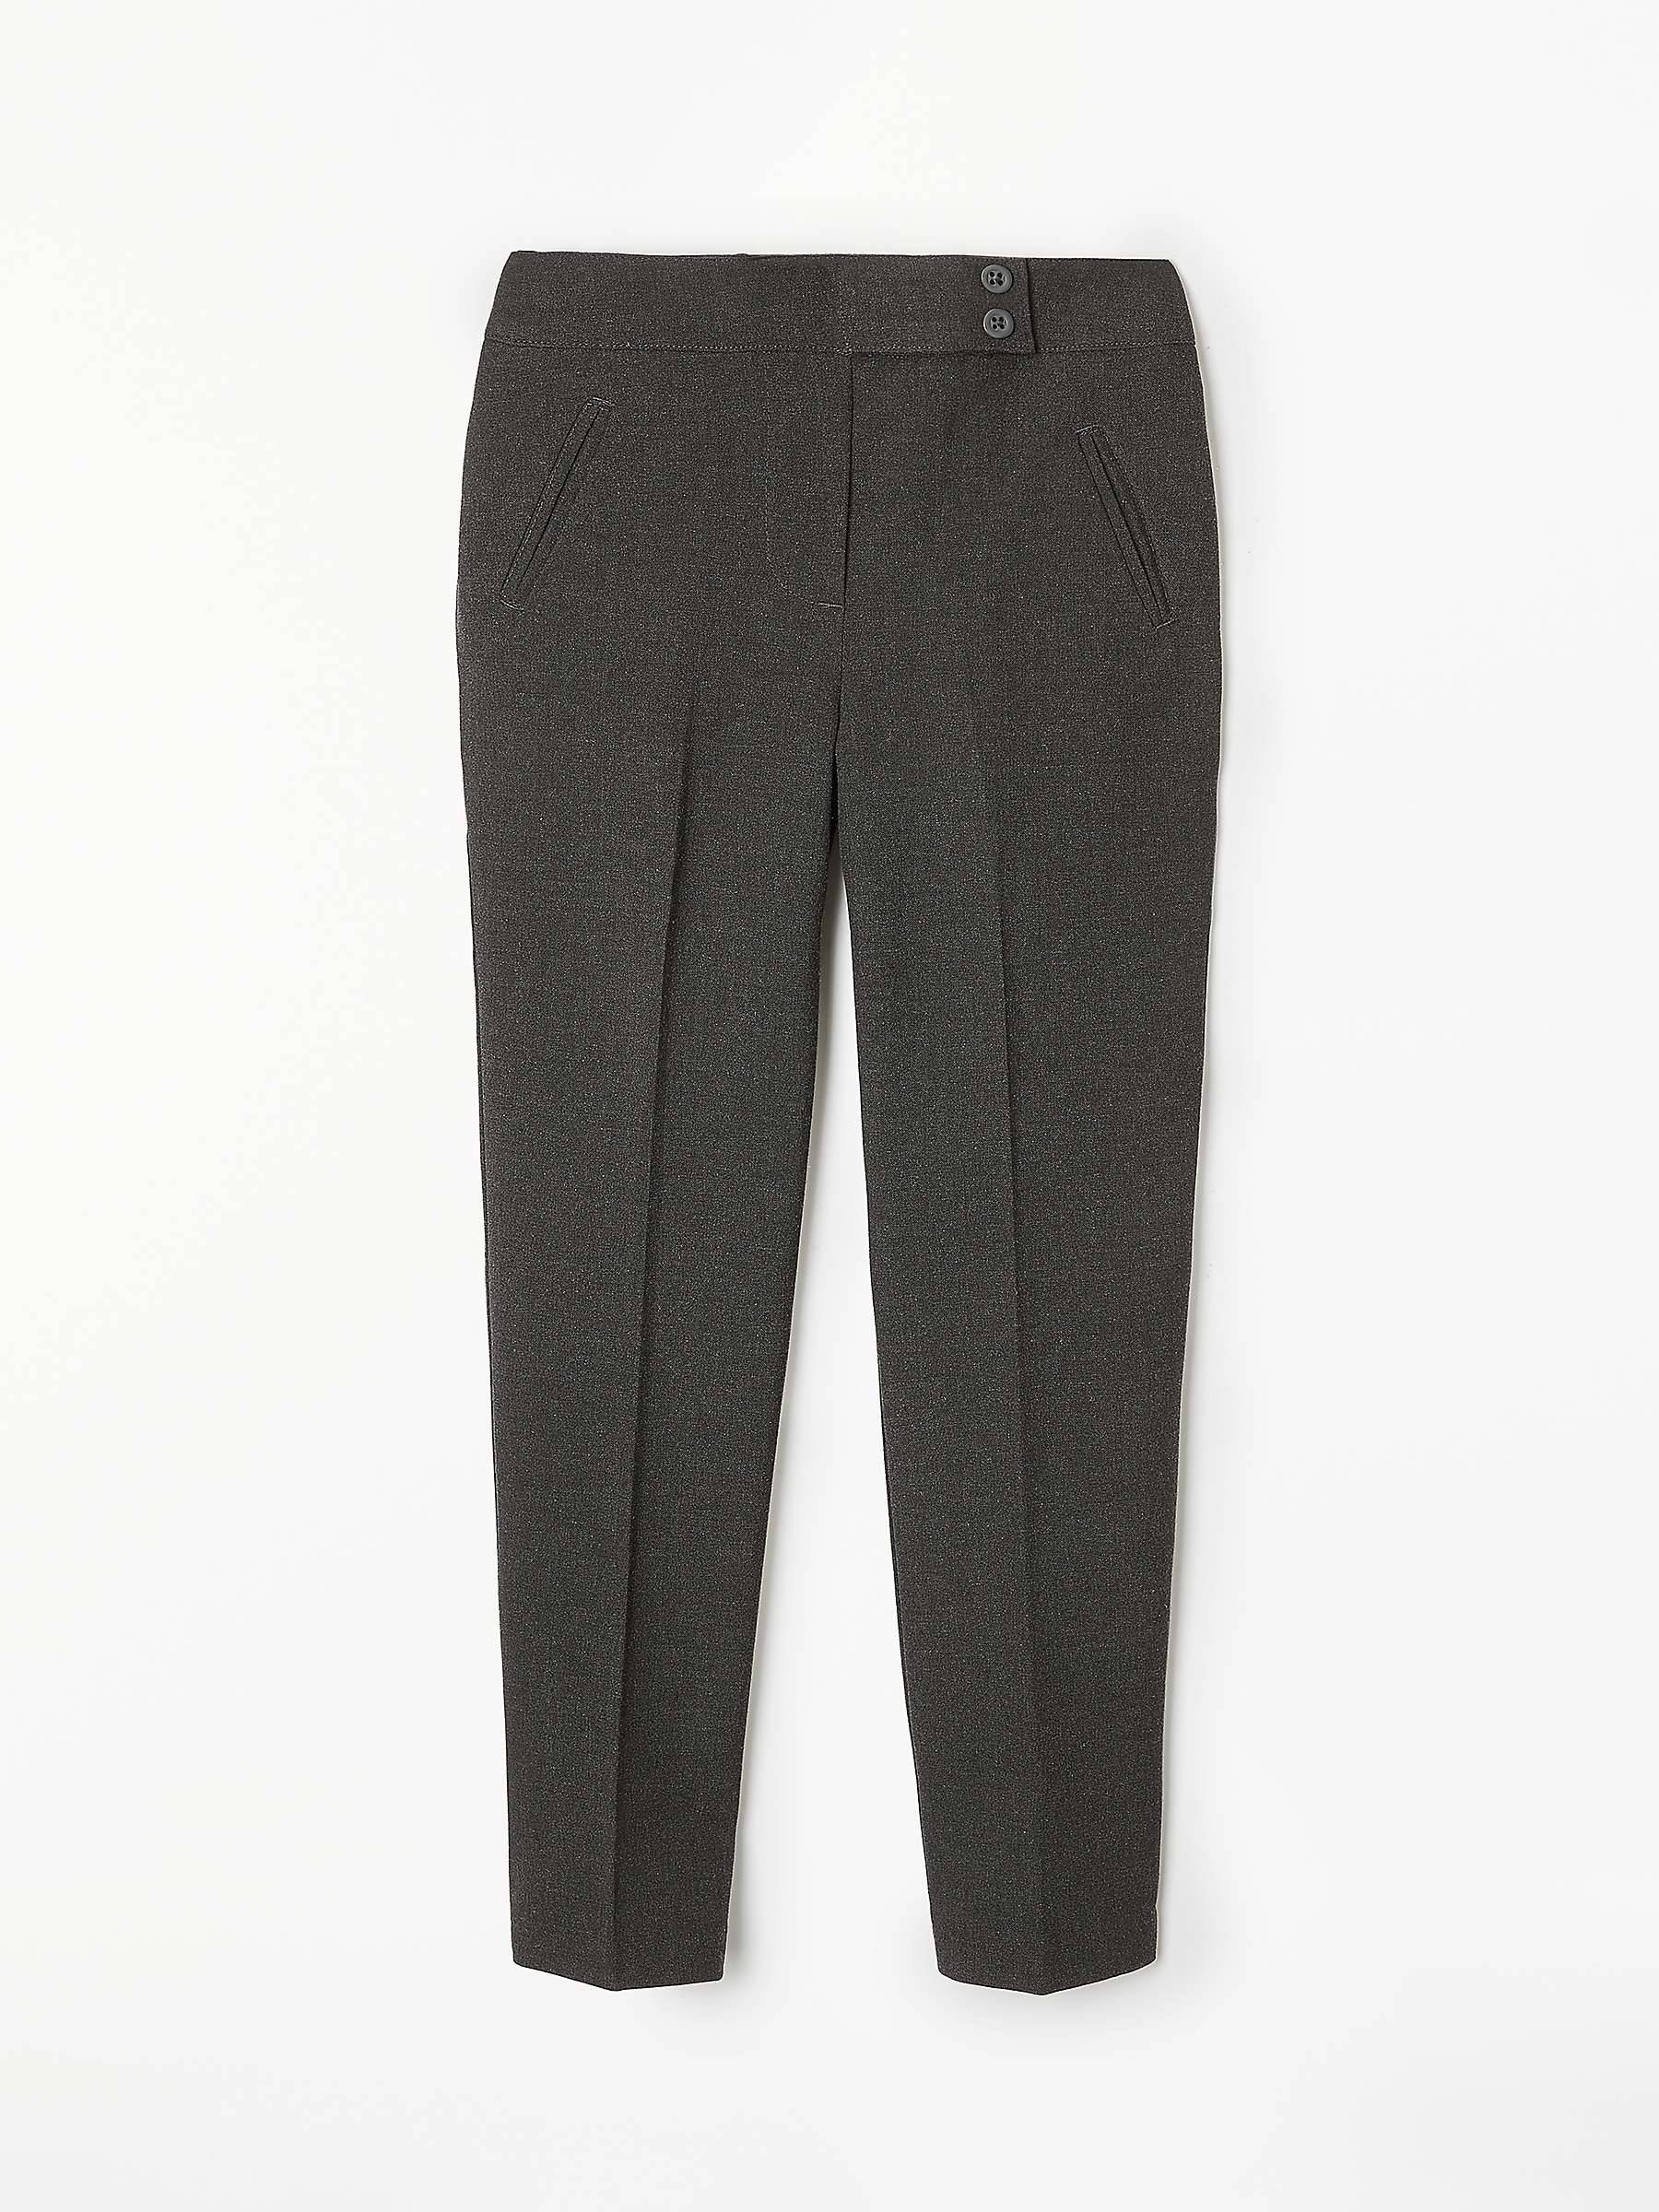 Buy John Lewis Girls' Adjustable Waist Stain Resistant Button School Trousers, Grey Online at johnlewis.com